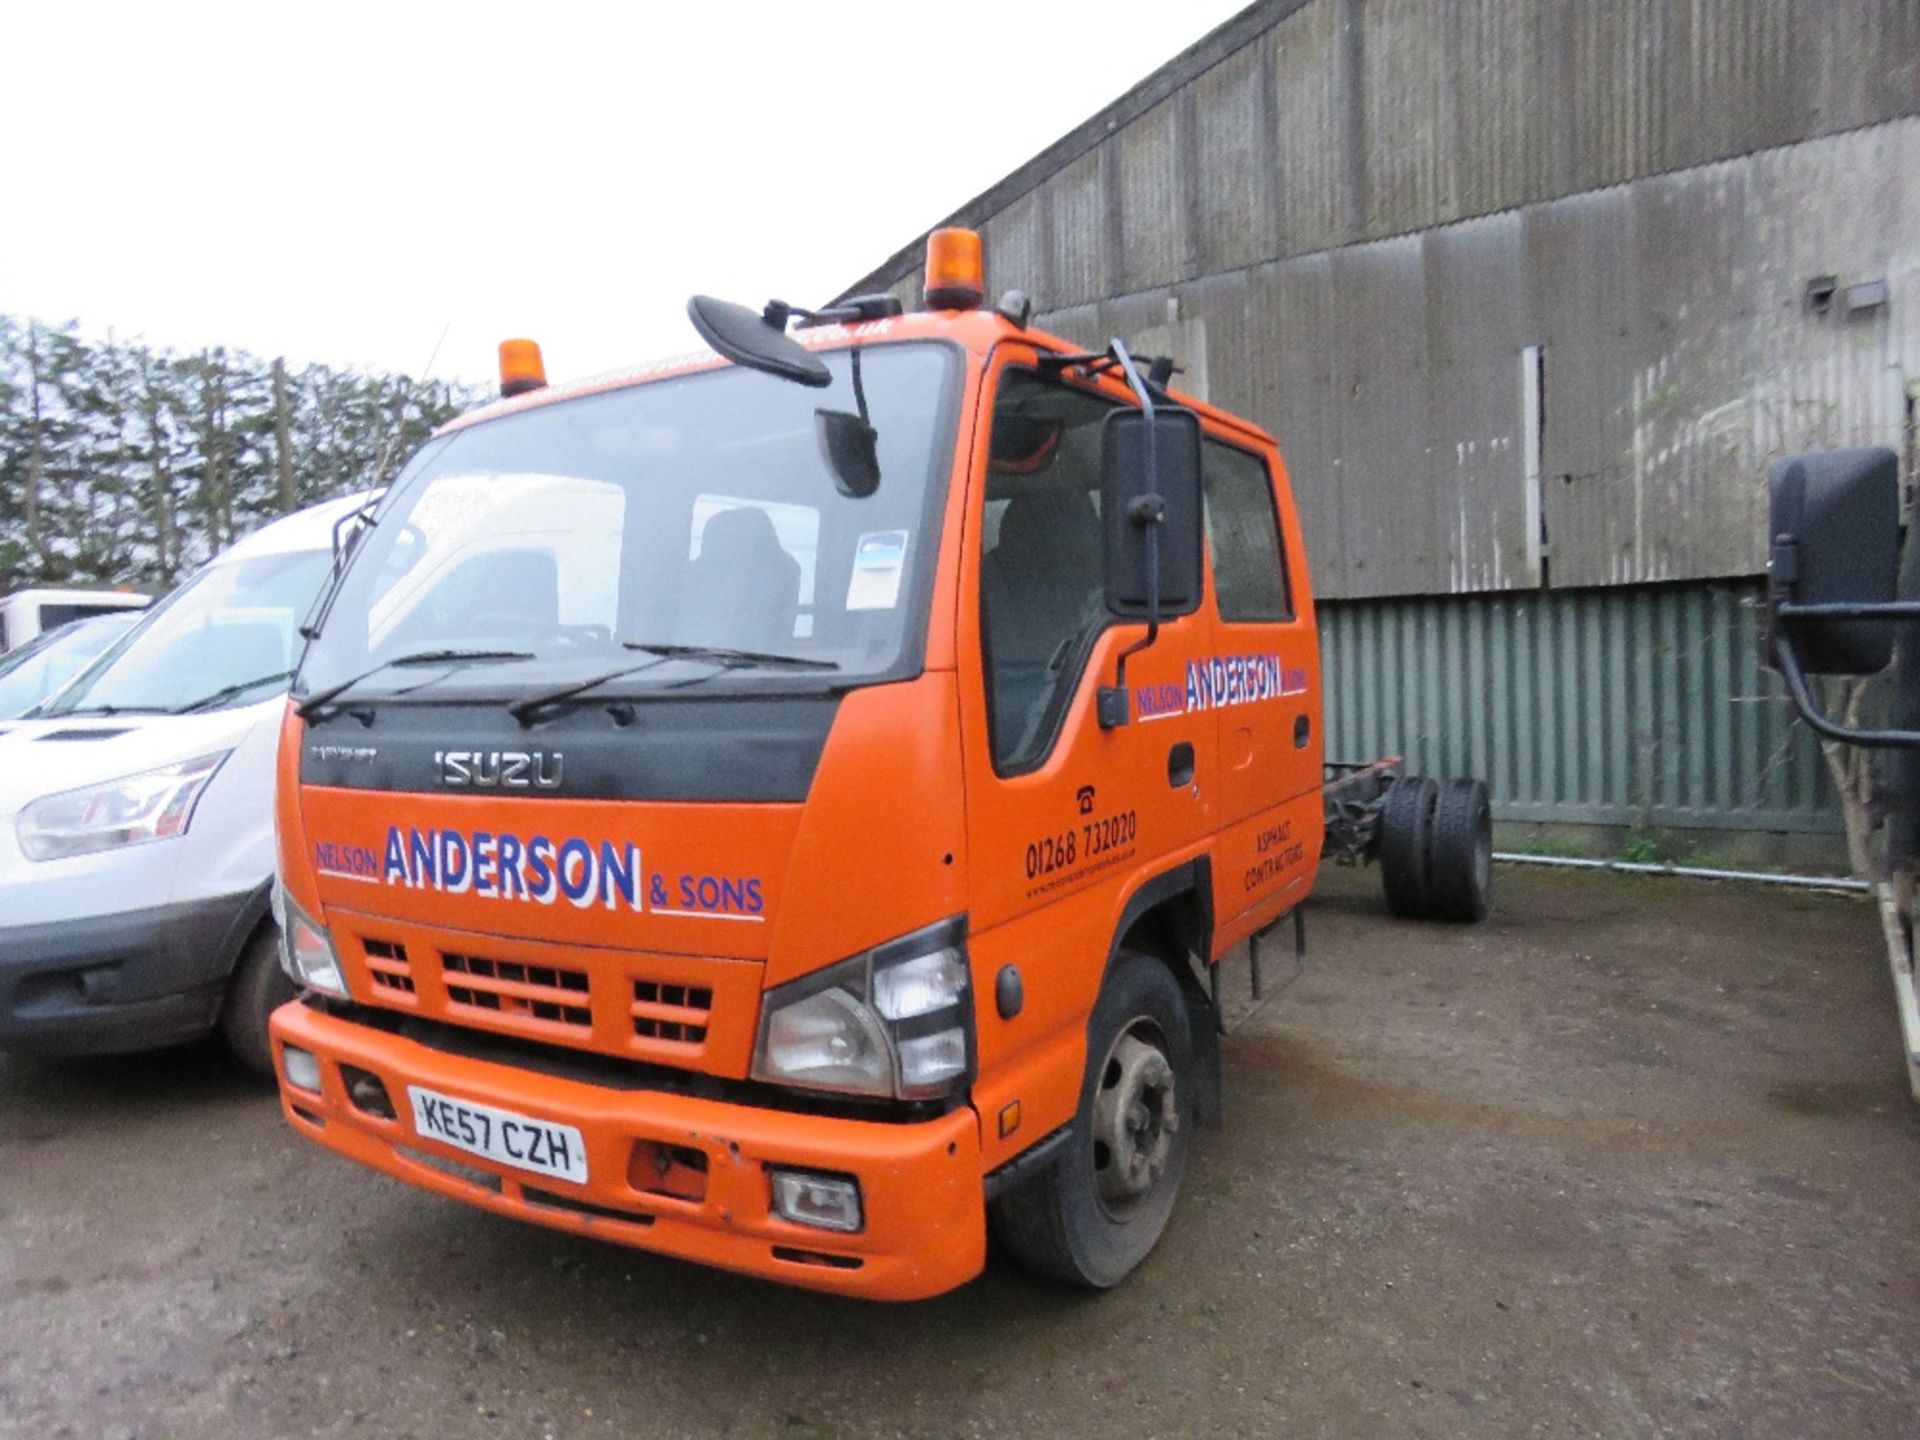 ISUZU DOUBLE CAB EASYSHIFT GEARBOX 7500KG RATED CHASSIS CAB LORRY. REG KE57 CZH. 12FT LENGTH OF CHAS - Image 3 of 9